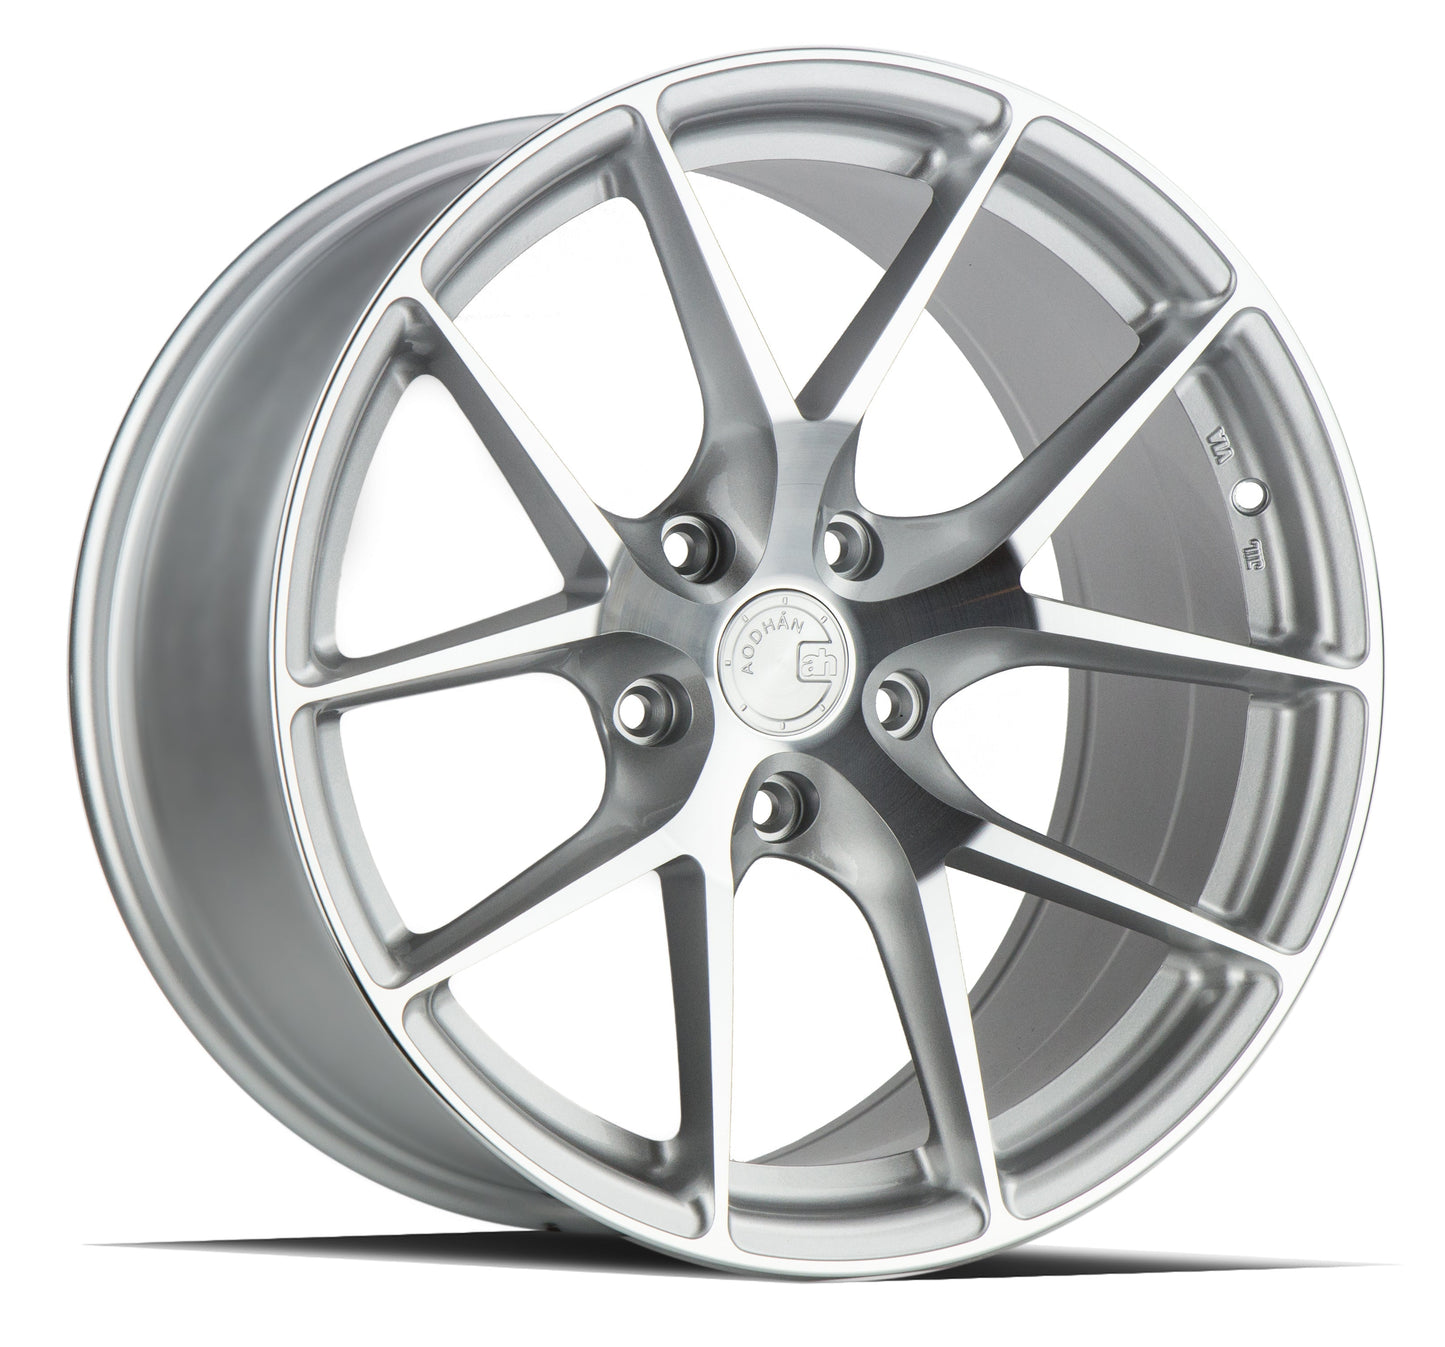 18" Aodhan AFF7 Gloss Silver Machined Face 5x114.3 ( Staggered Setup ) ( Set of 4 )